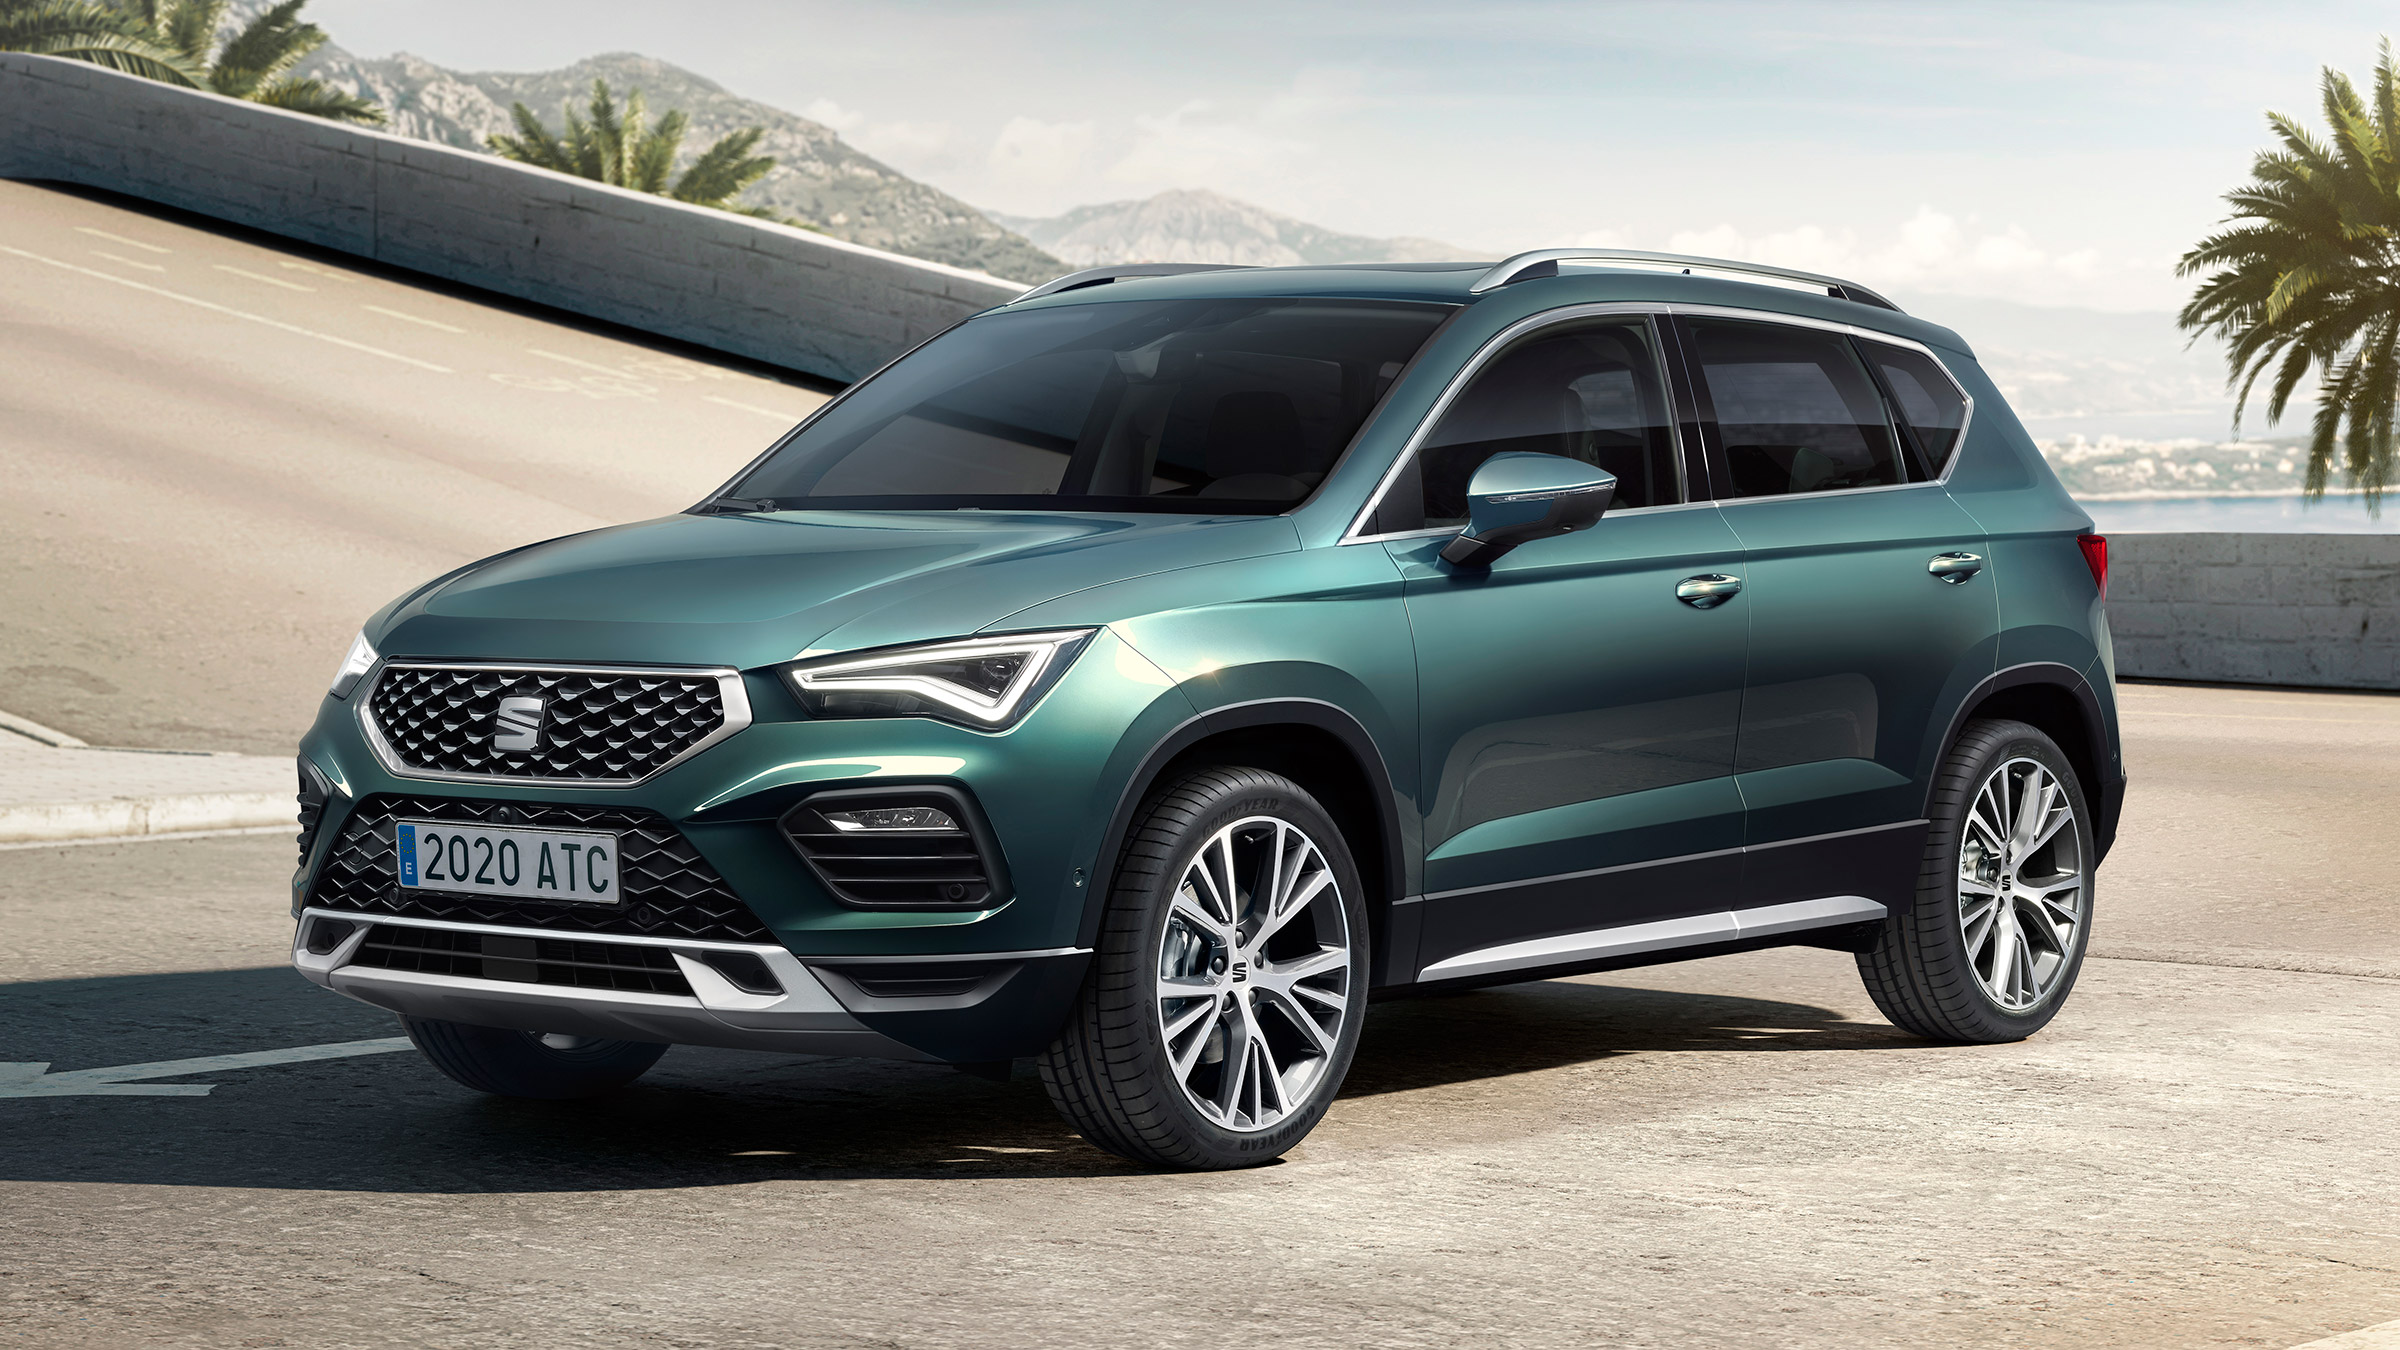 New SEAT Ateca facelift arrives with styling borrowed from 